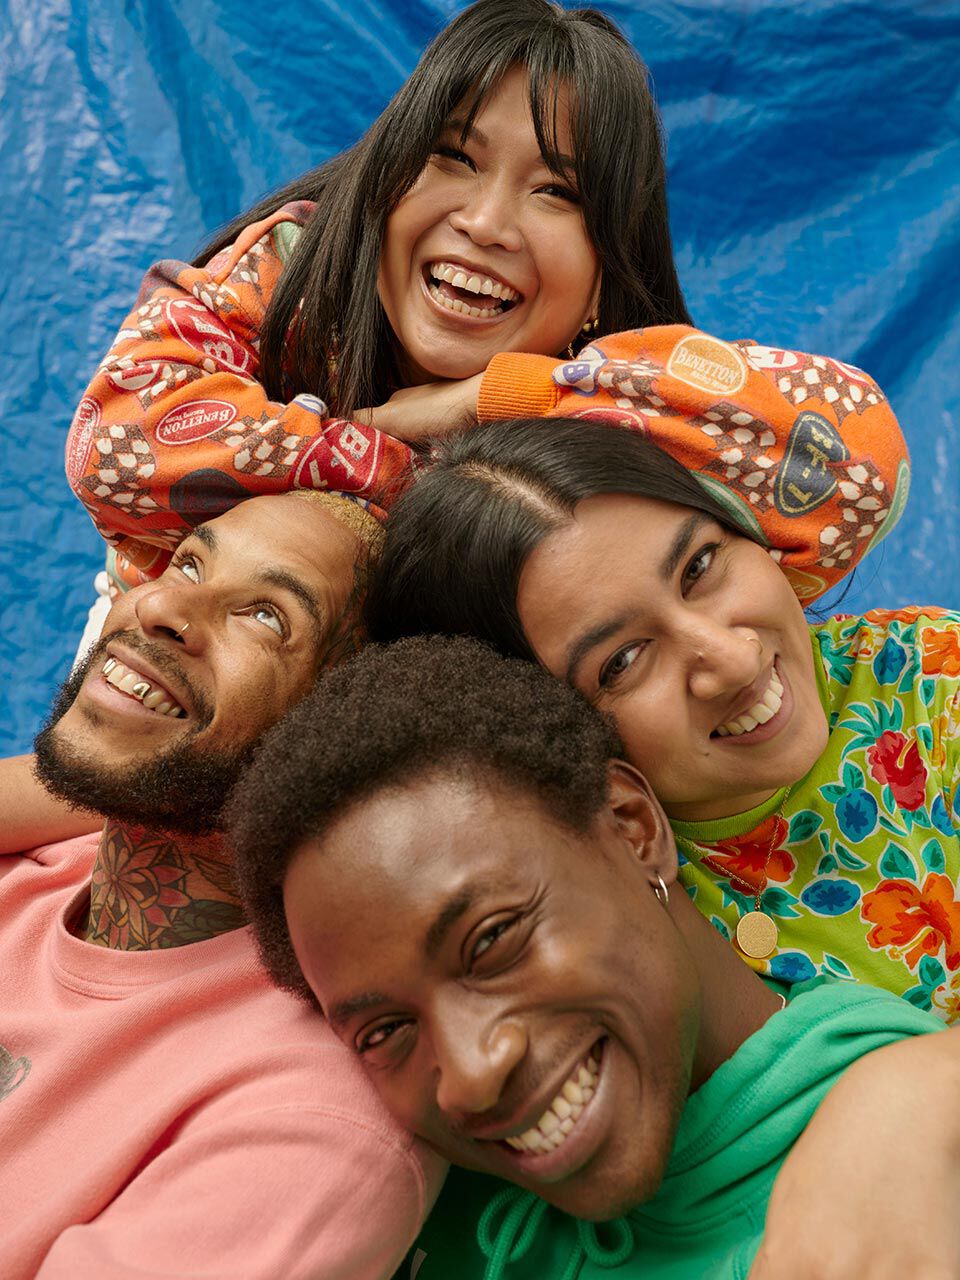 United Colors of Benetton - Official Website